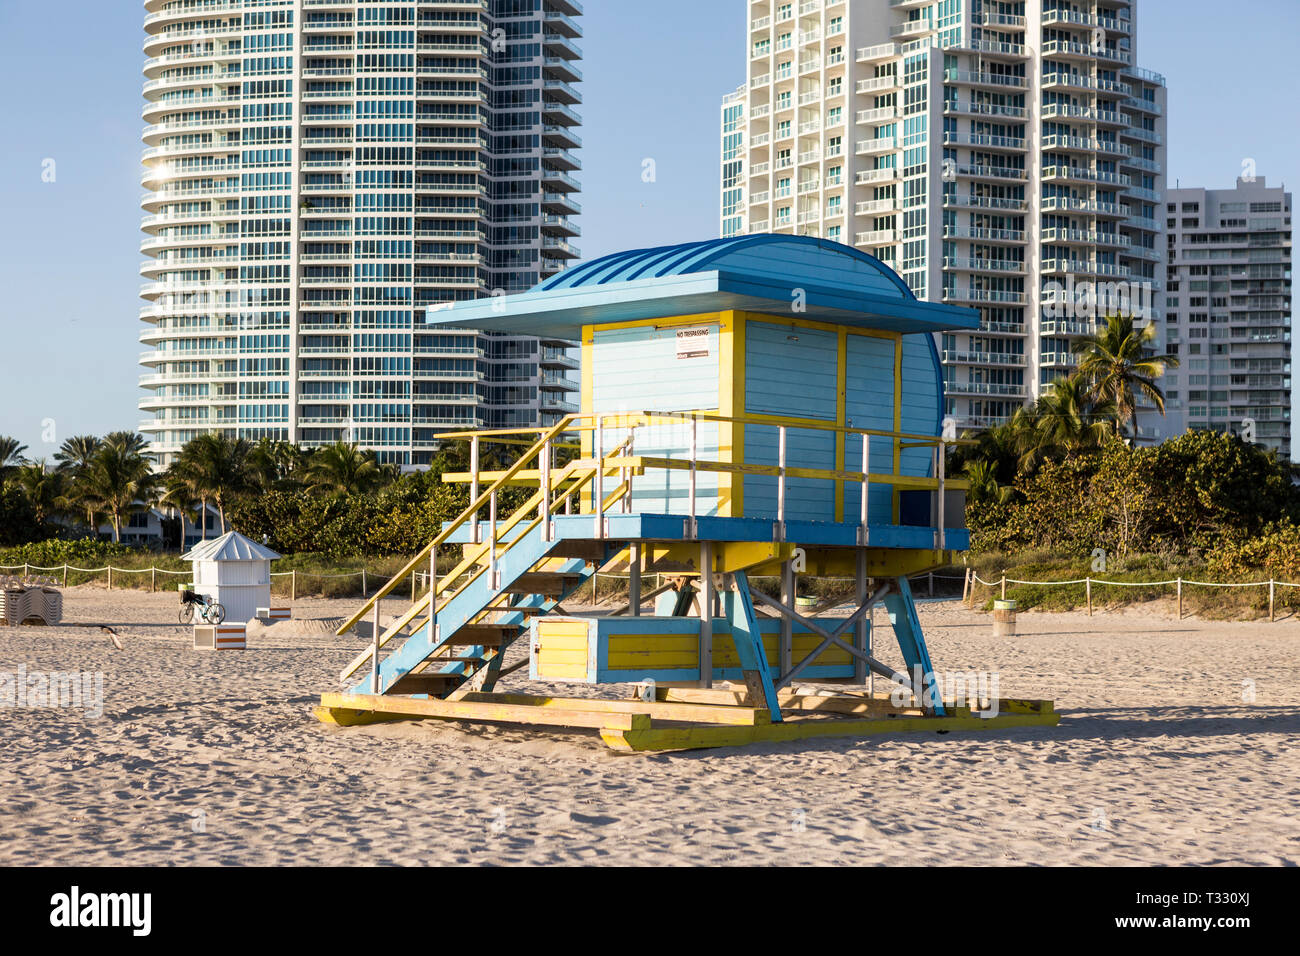 An iconic lifeguard tower with apartment buildings in the background on Miami Beach, Florida, USA Stock Photo